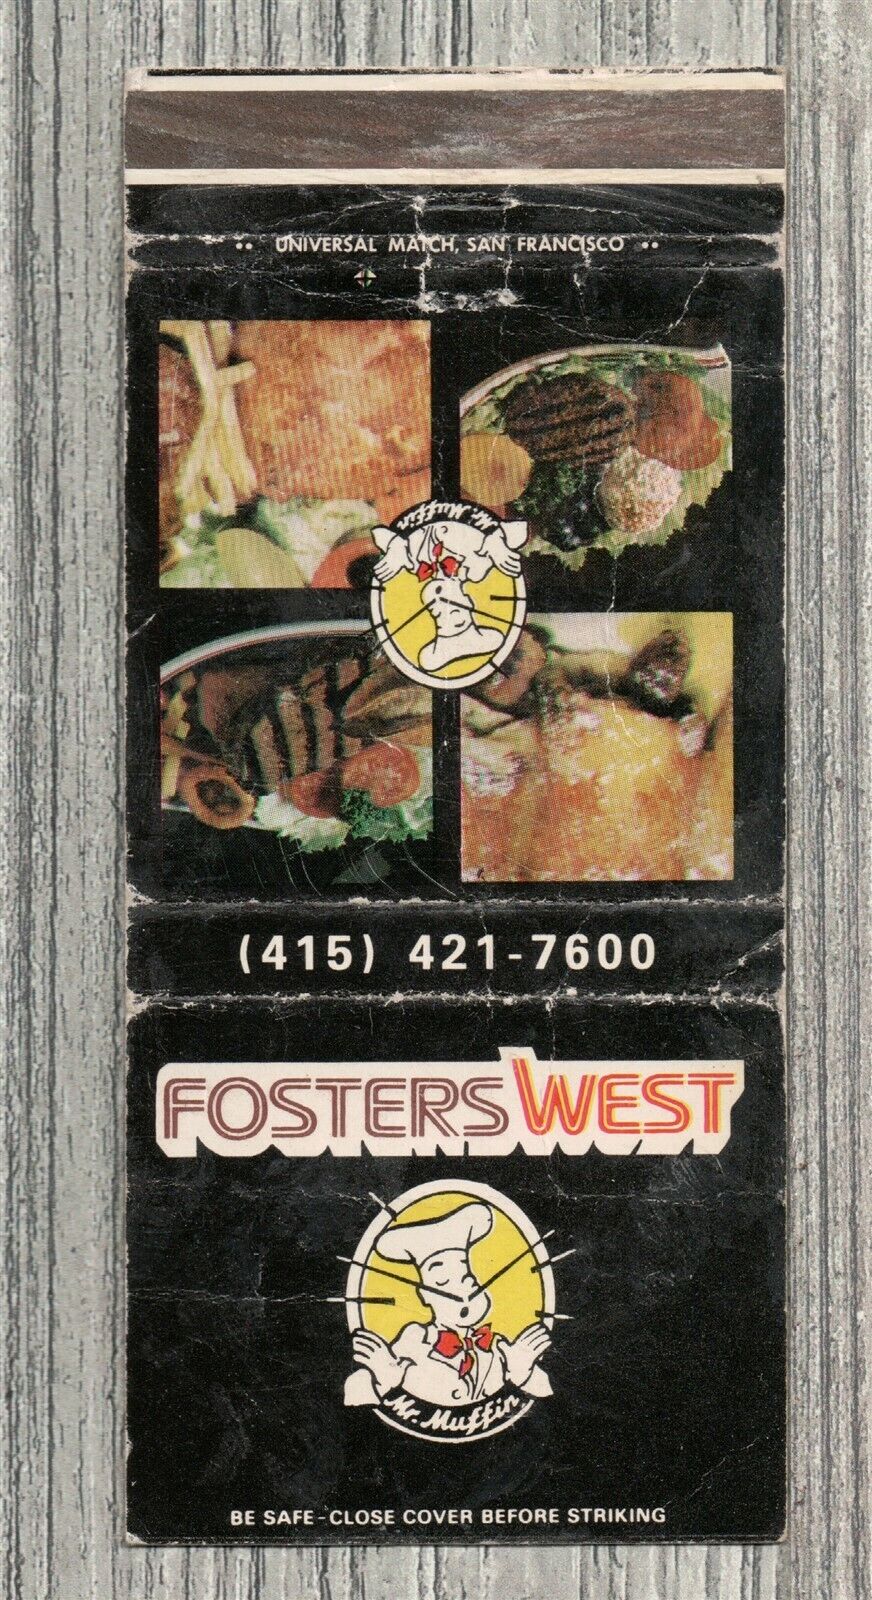 Matchbook Cover-Fosters West Restaurant San Francisco California-5286